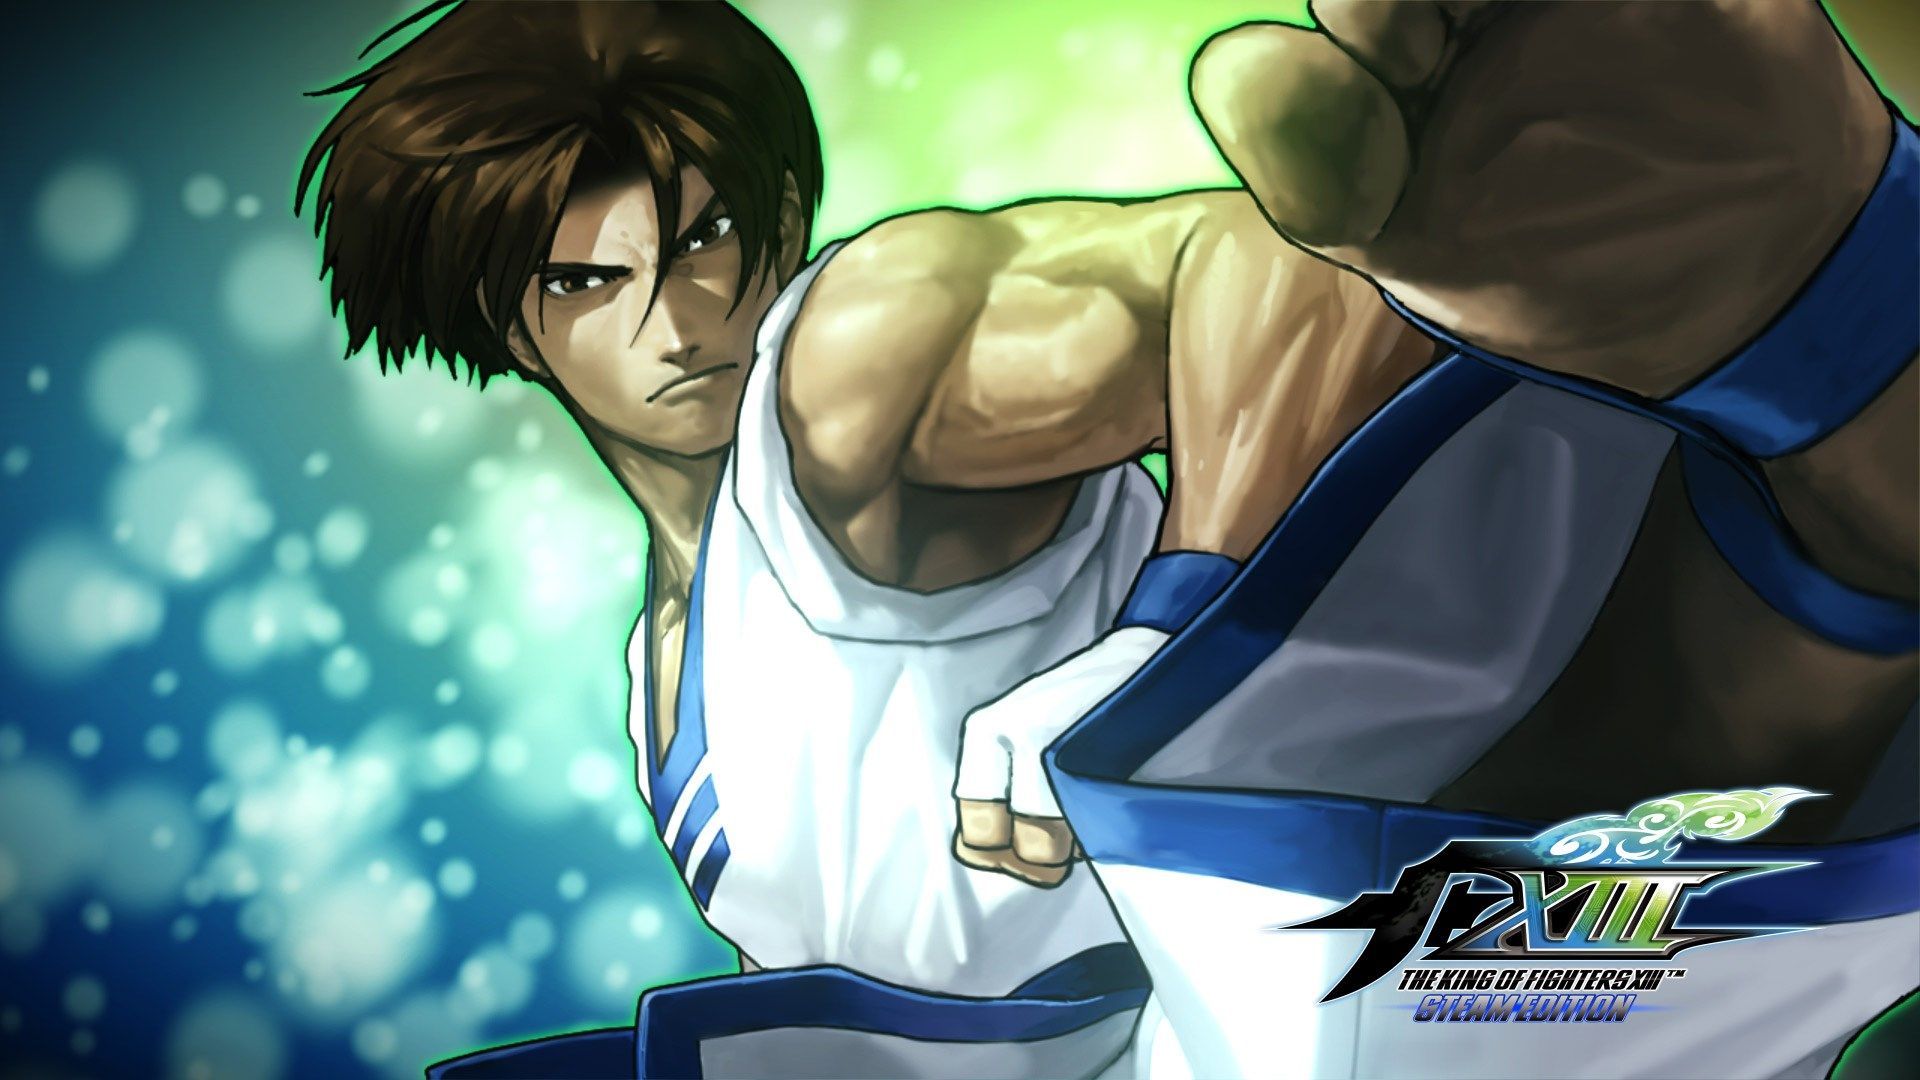 The King of Fighters XIII: Steam Edition game wallpaper. King of fighters, Most beautiful wallpaper, Great background